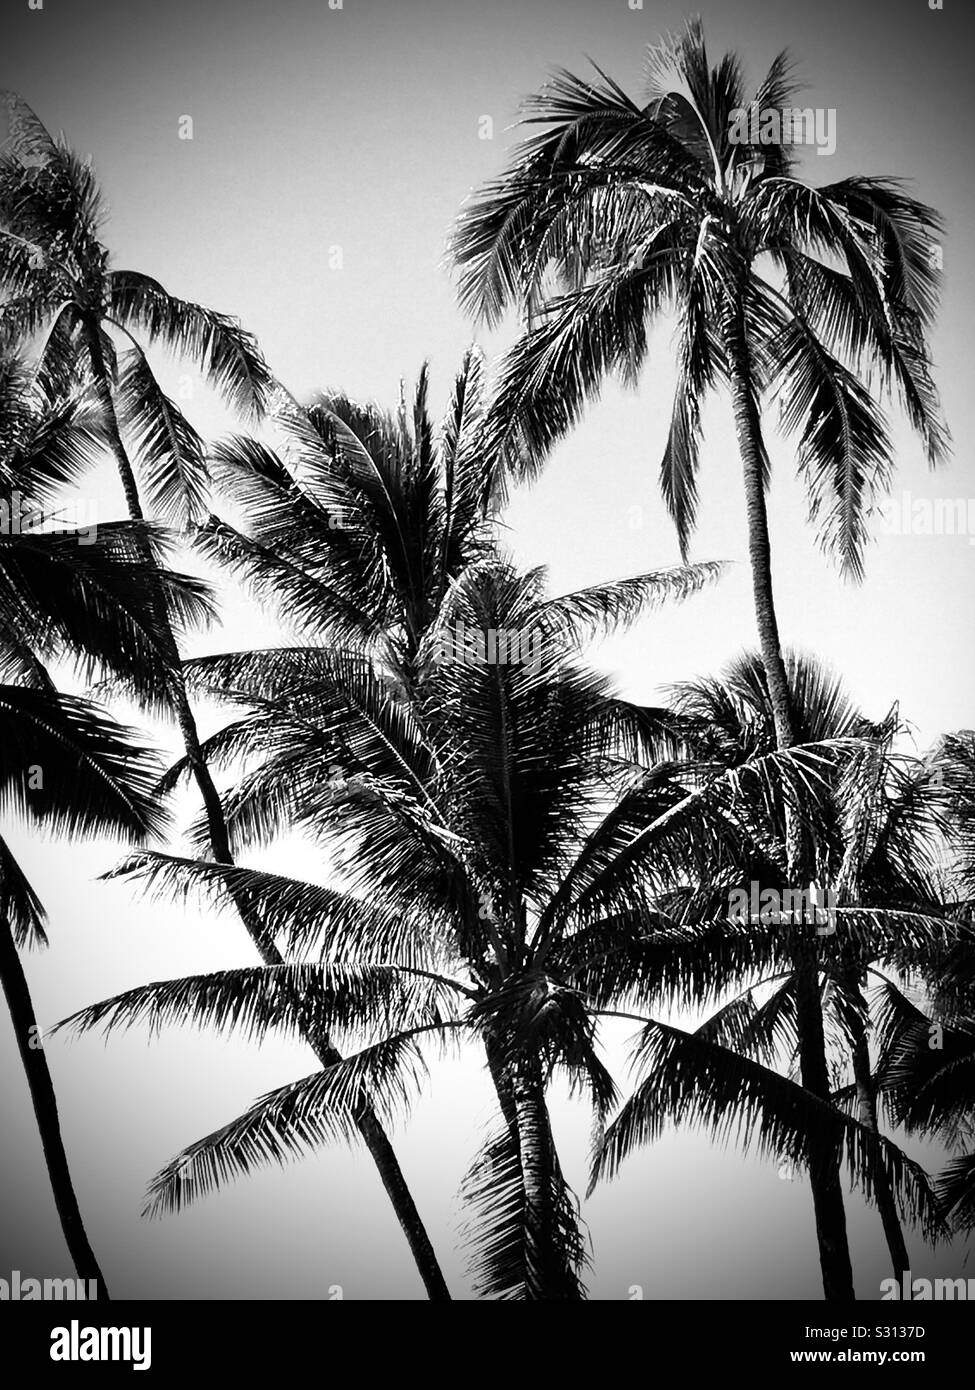 Tropical Coconut Palms In Black And White Stock Photo Alamy